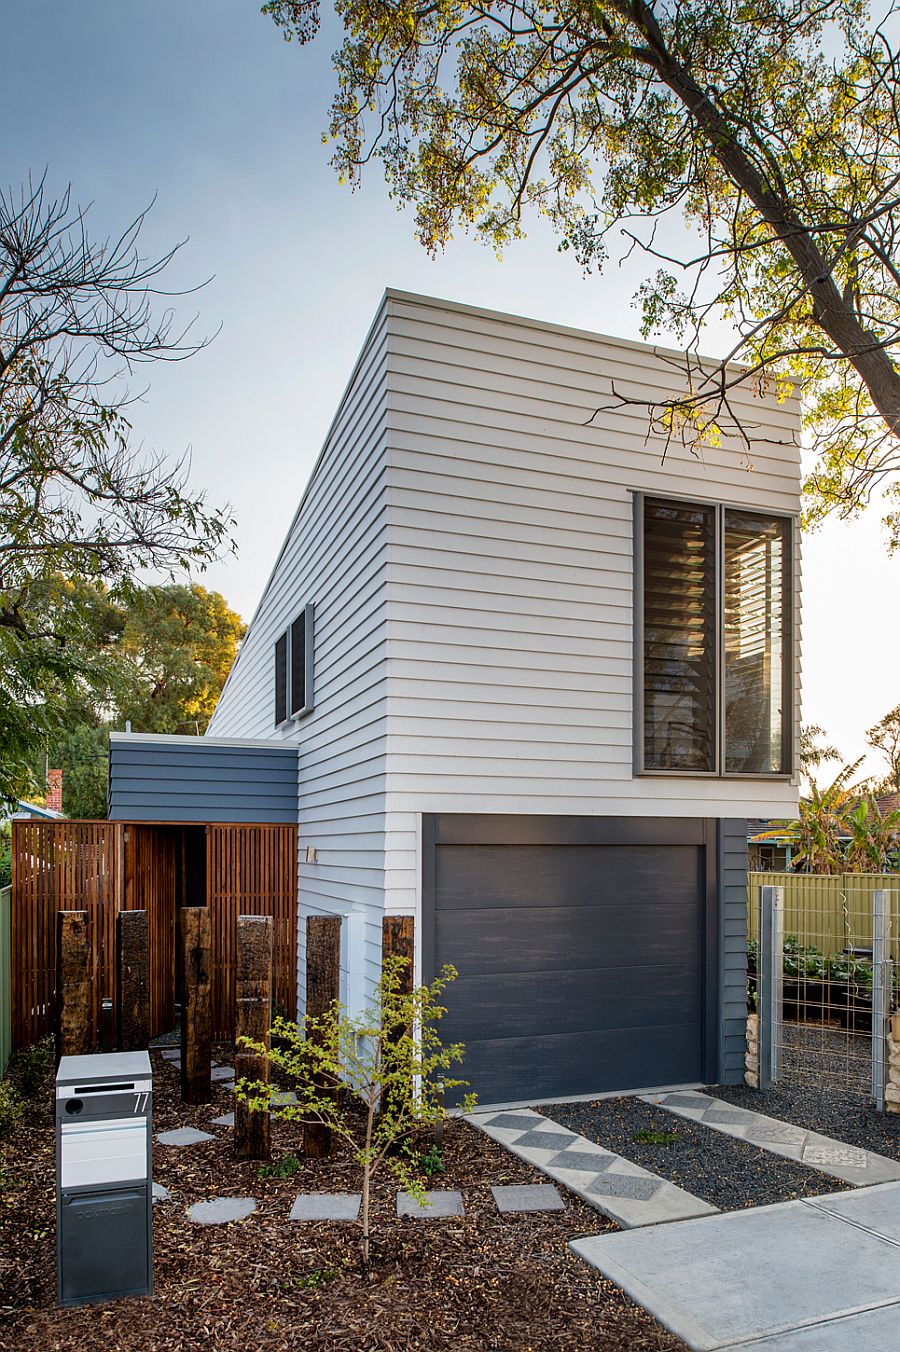 Sussex Street House: Steel and Timber-Framed Modern Suburban Home